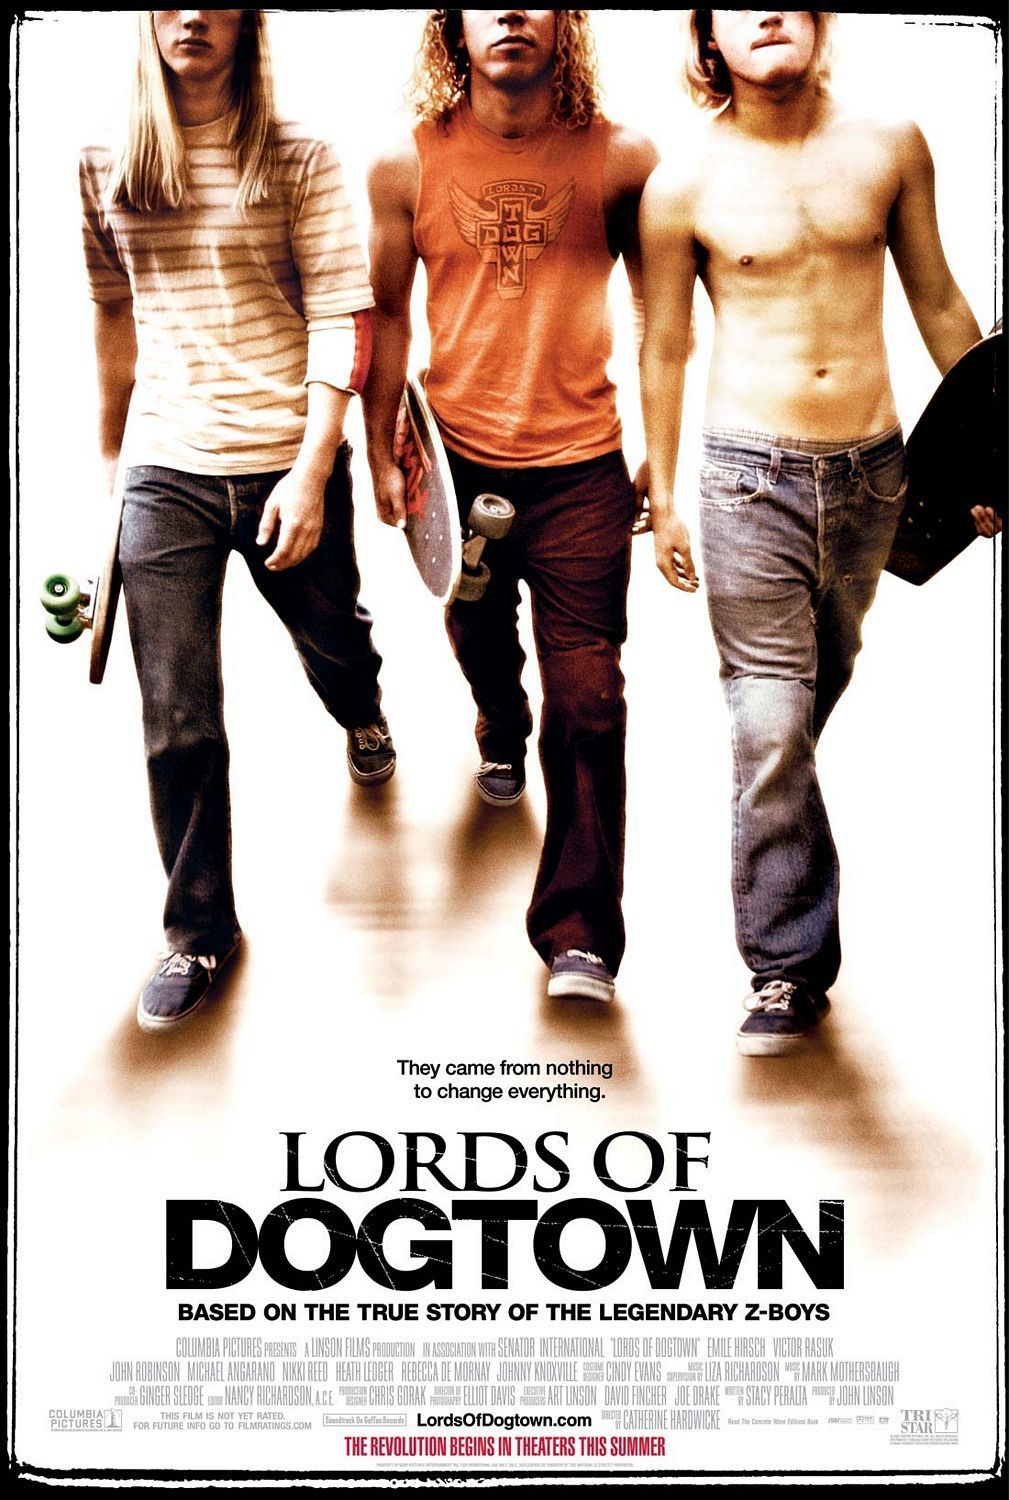 Lords-of-Dogtown-Poster-lords-of-dogtown-19550800-1009-1500.jpg